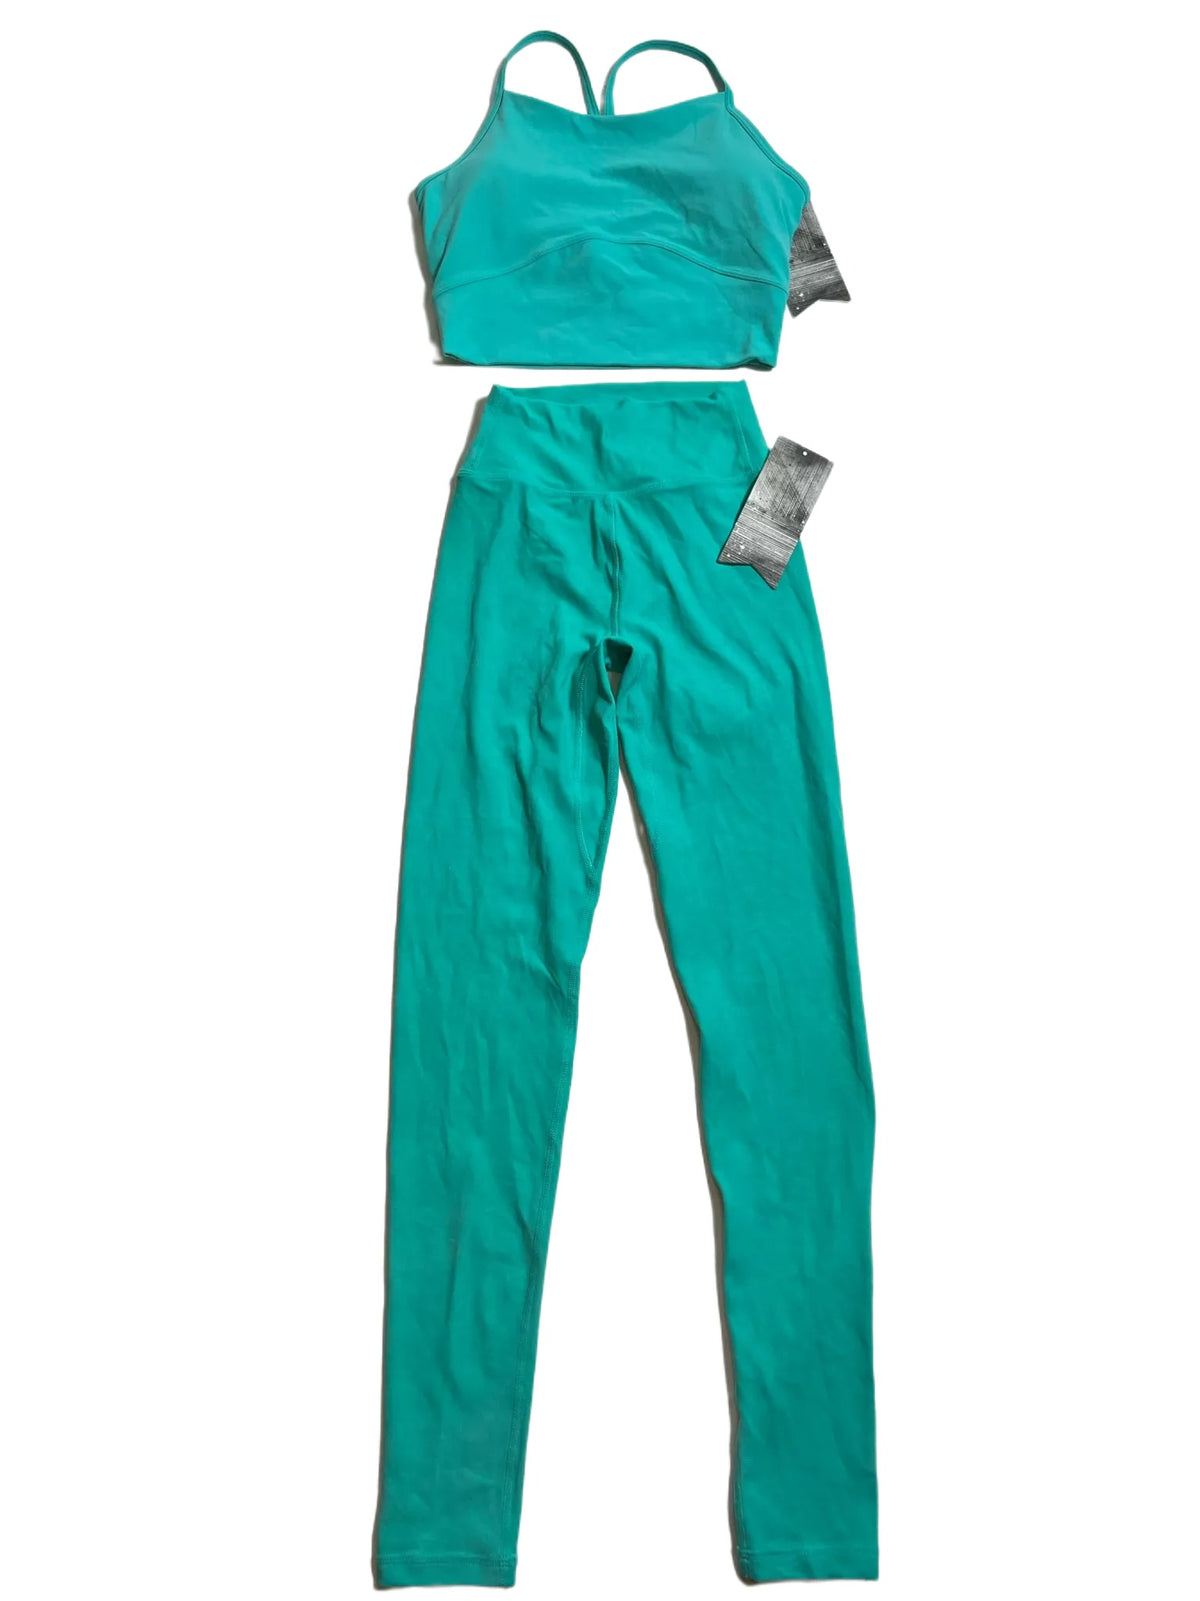 Stori- Teal Legging Matching Set New With Tags!